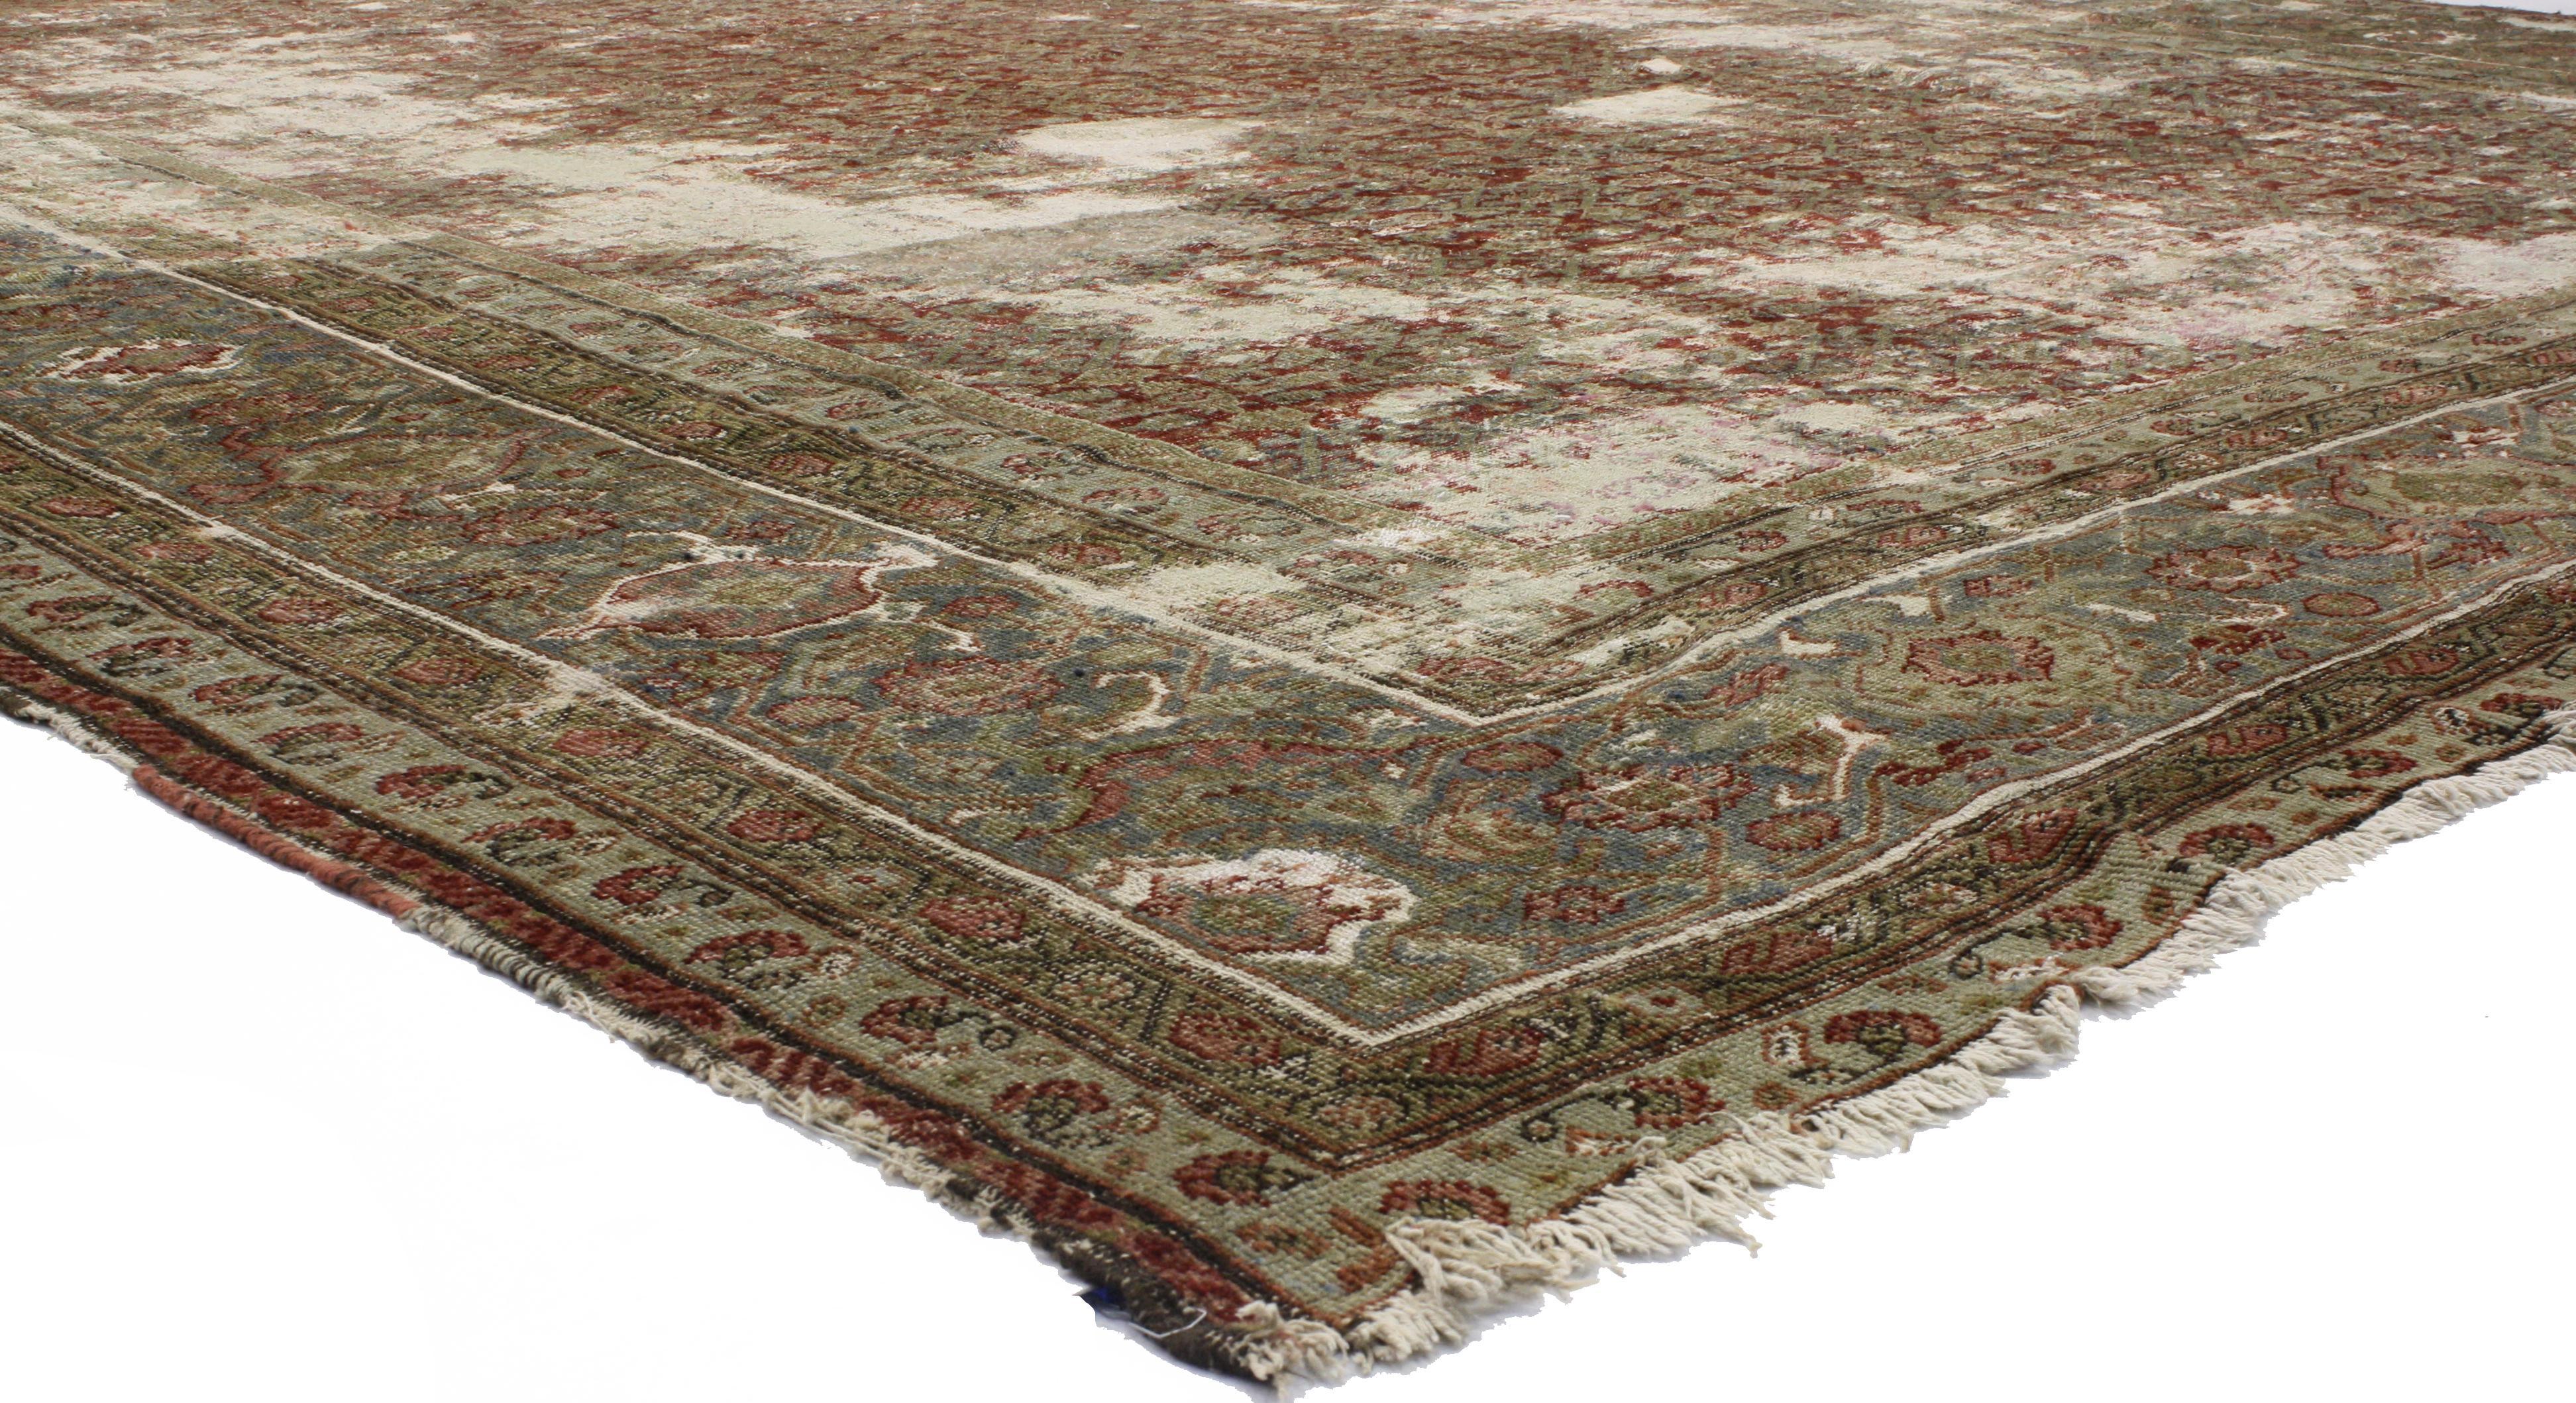 19th Century Antique-Worn Persian Sultanabad Rug, Weathered Beauty Meets Rustic Adirondack  For Sale